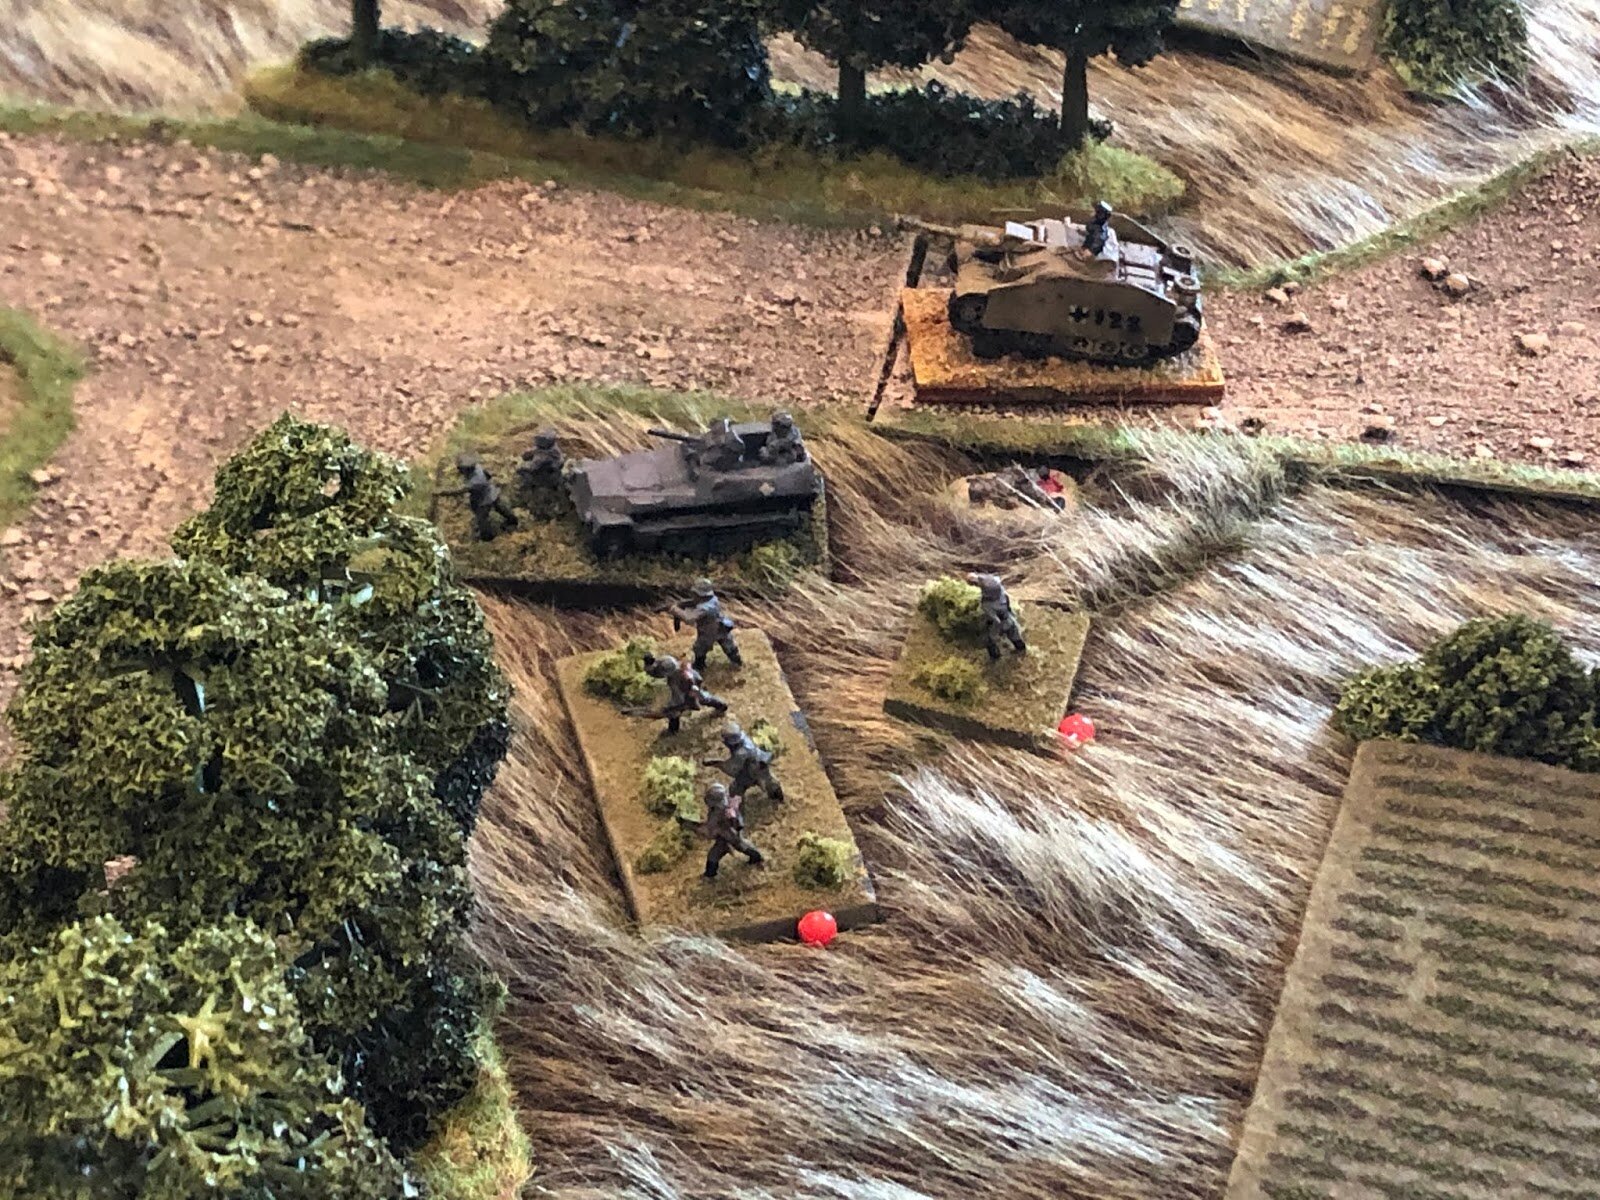 So he moves up, working as he goes, but he still can't get the Stug PC's vehicle crew to rally, though he does manage to get the 2nd Plt, 1st Co, commander and their squad back in the fight.